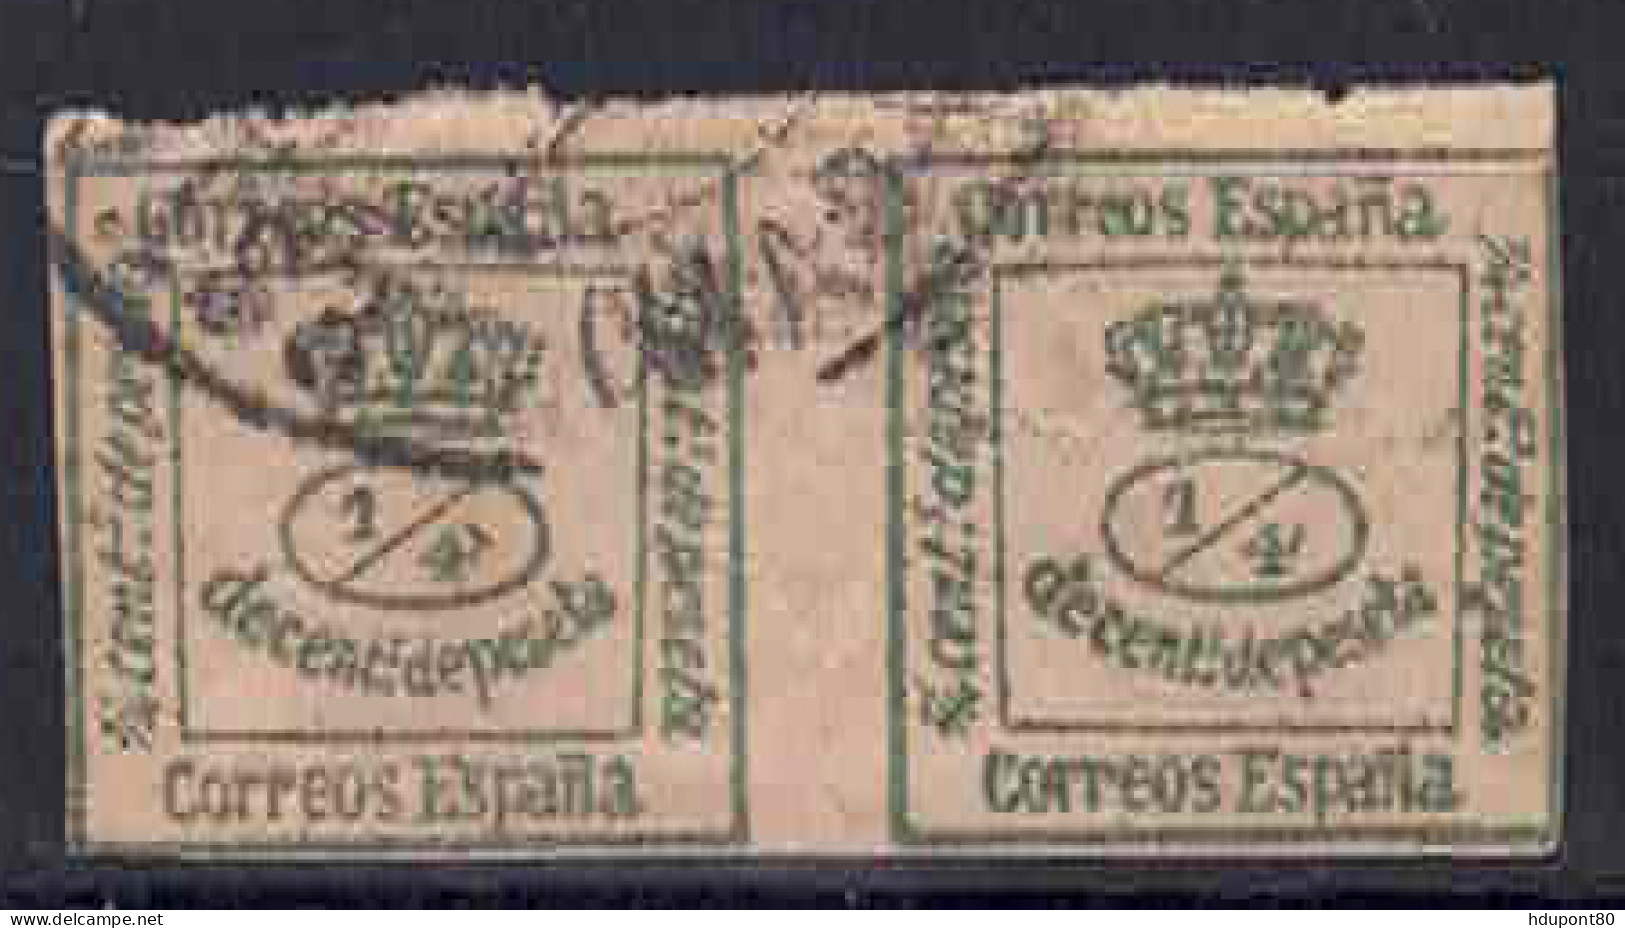 YT 140b - Used Stamps